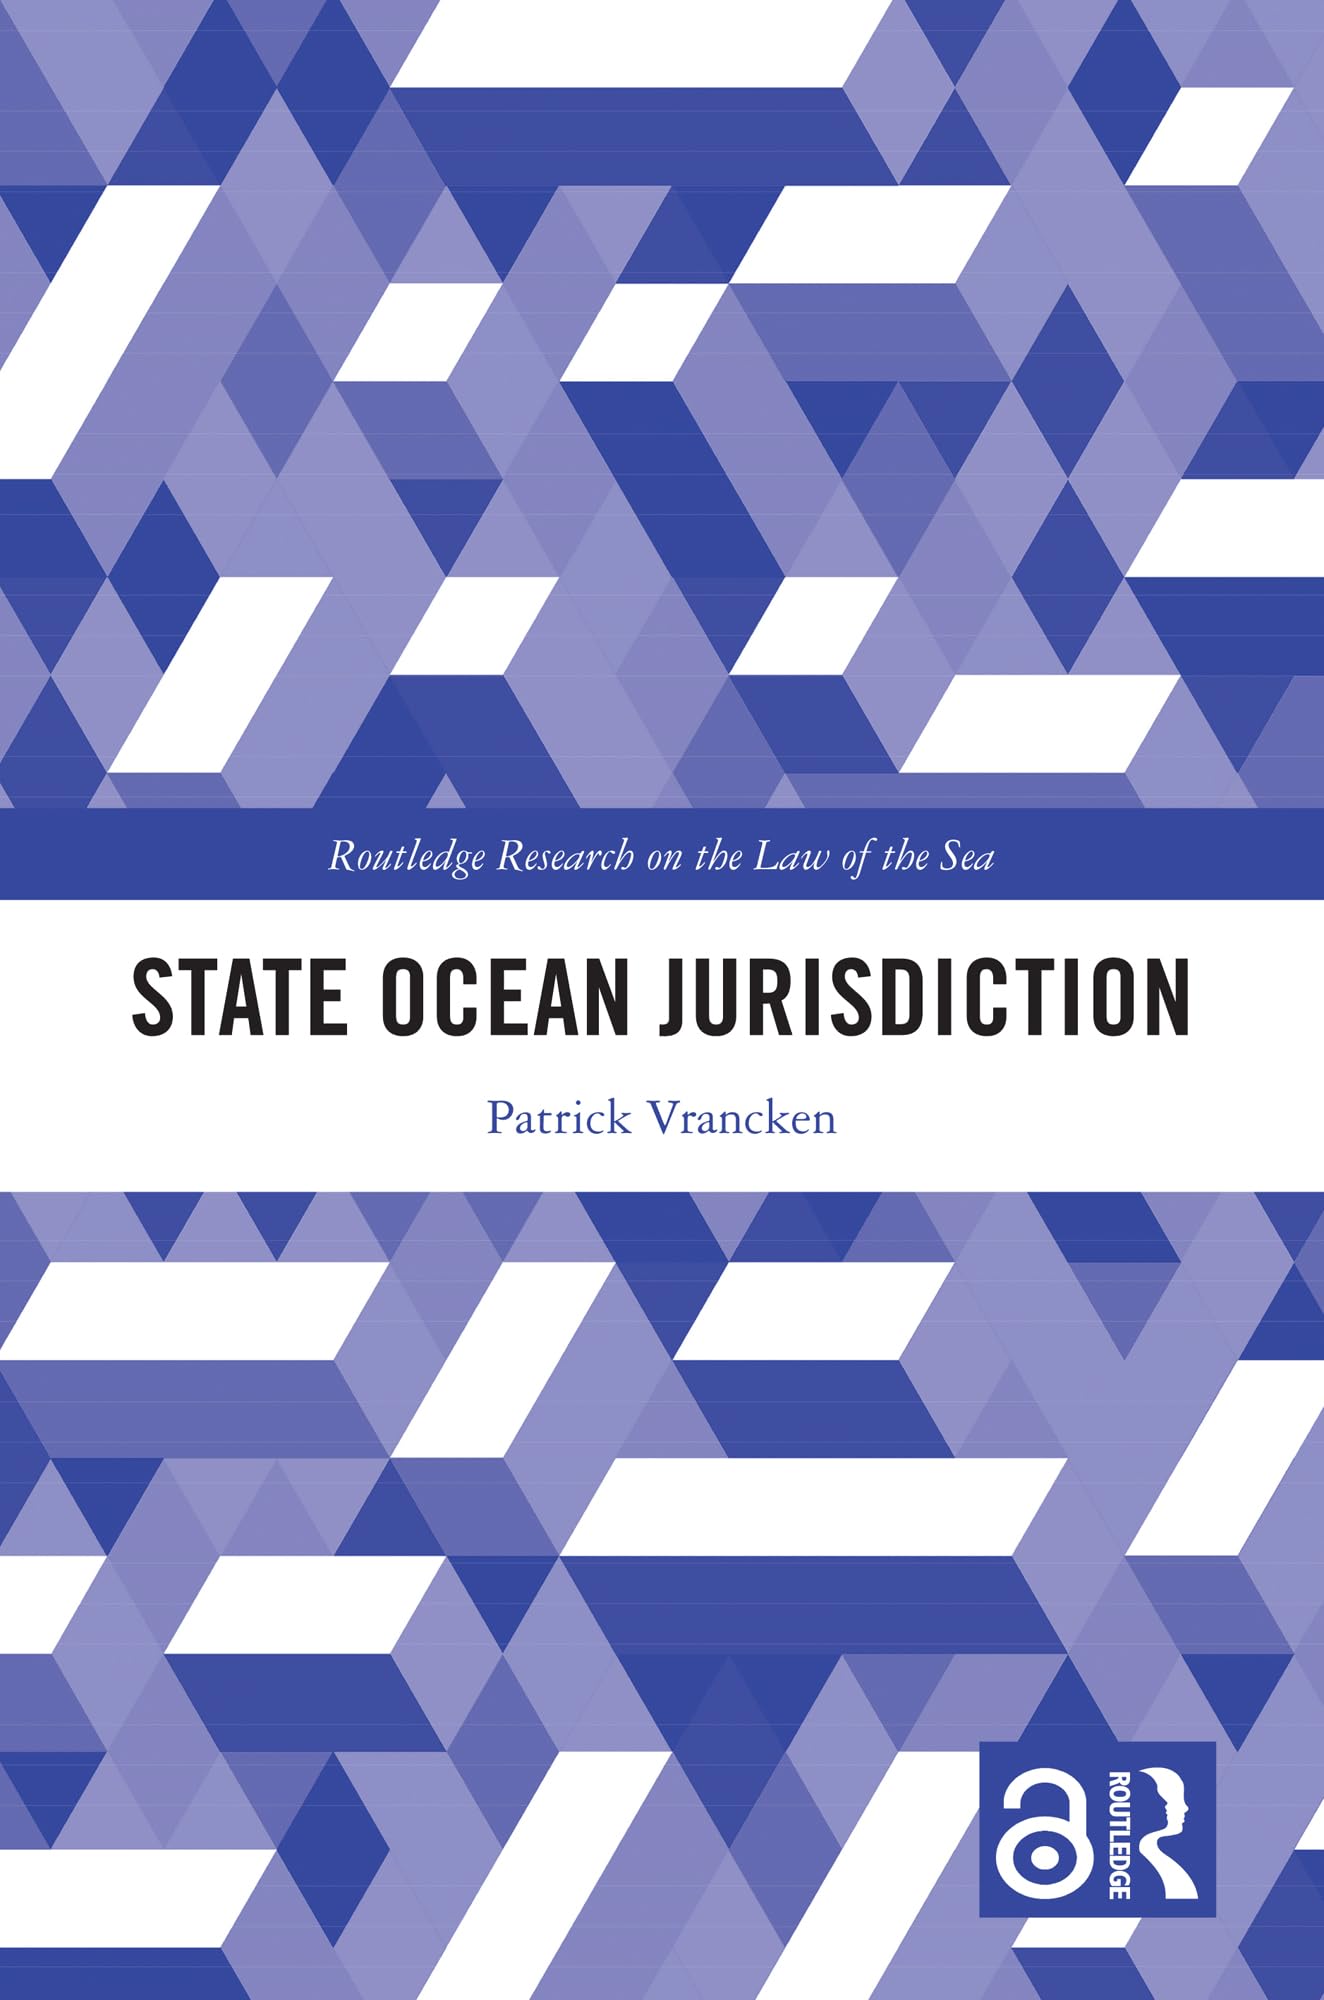 State Ocean Jurisdiction (Routledge Research on the Law of the Sea)